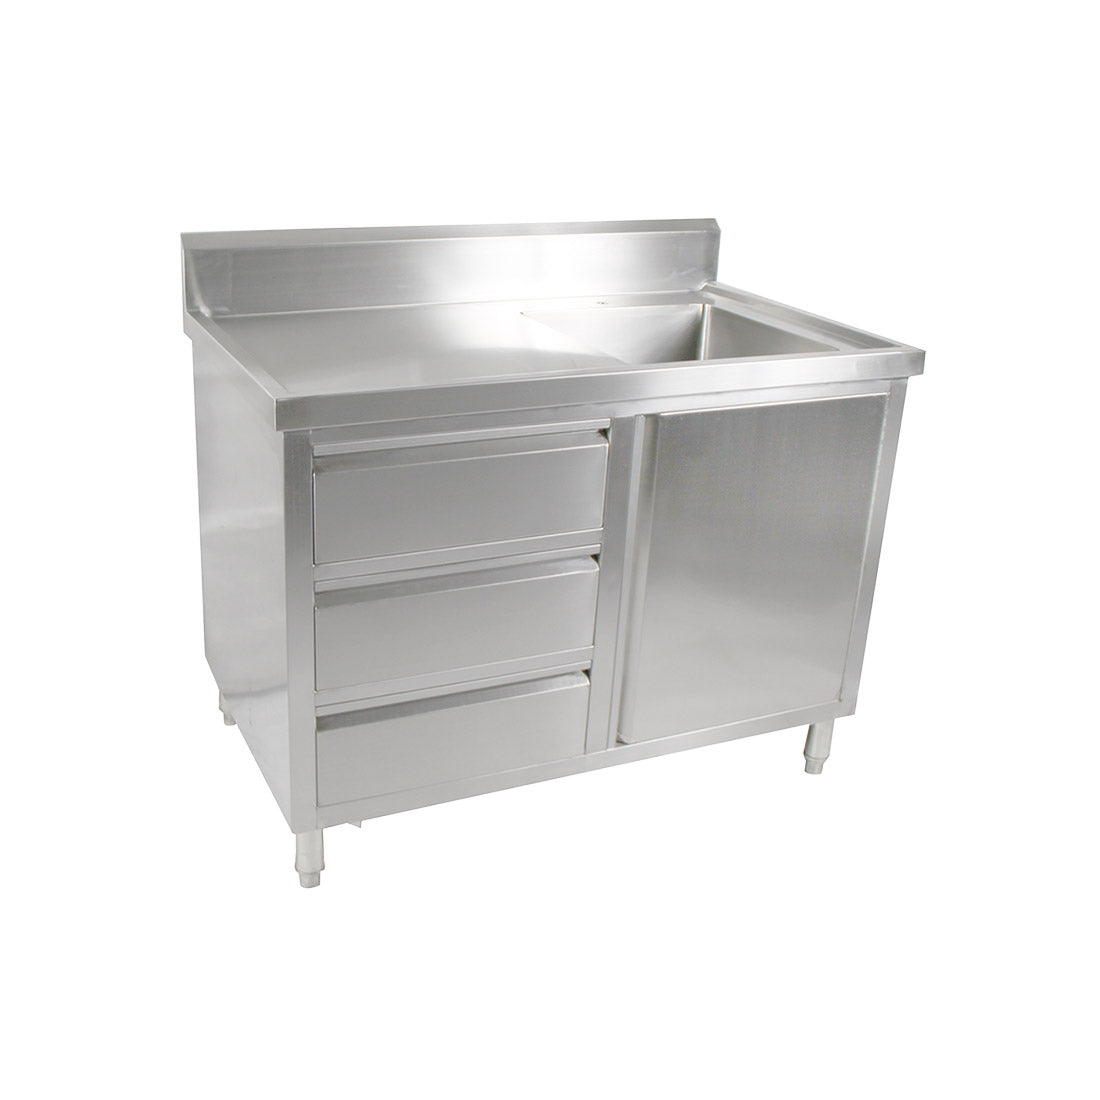 Modular Systems Cabinet with Right Sink 1200x600x900 SC-6-1200R-H